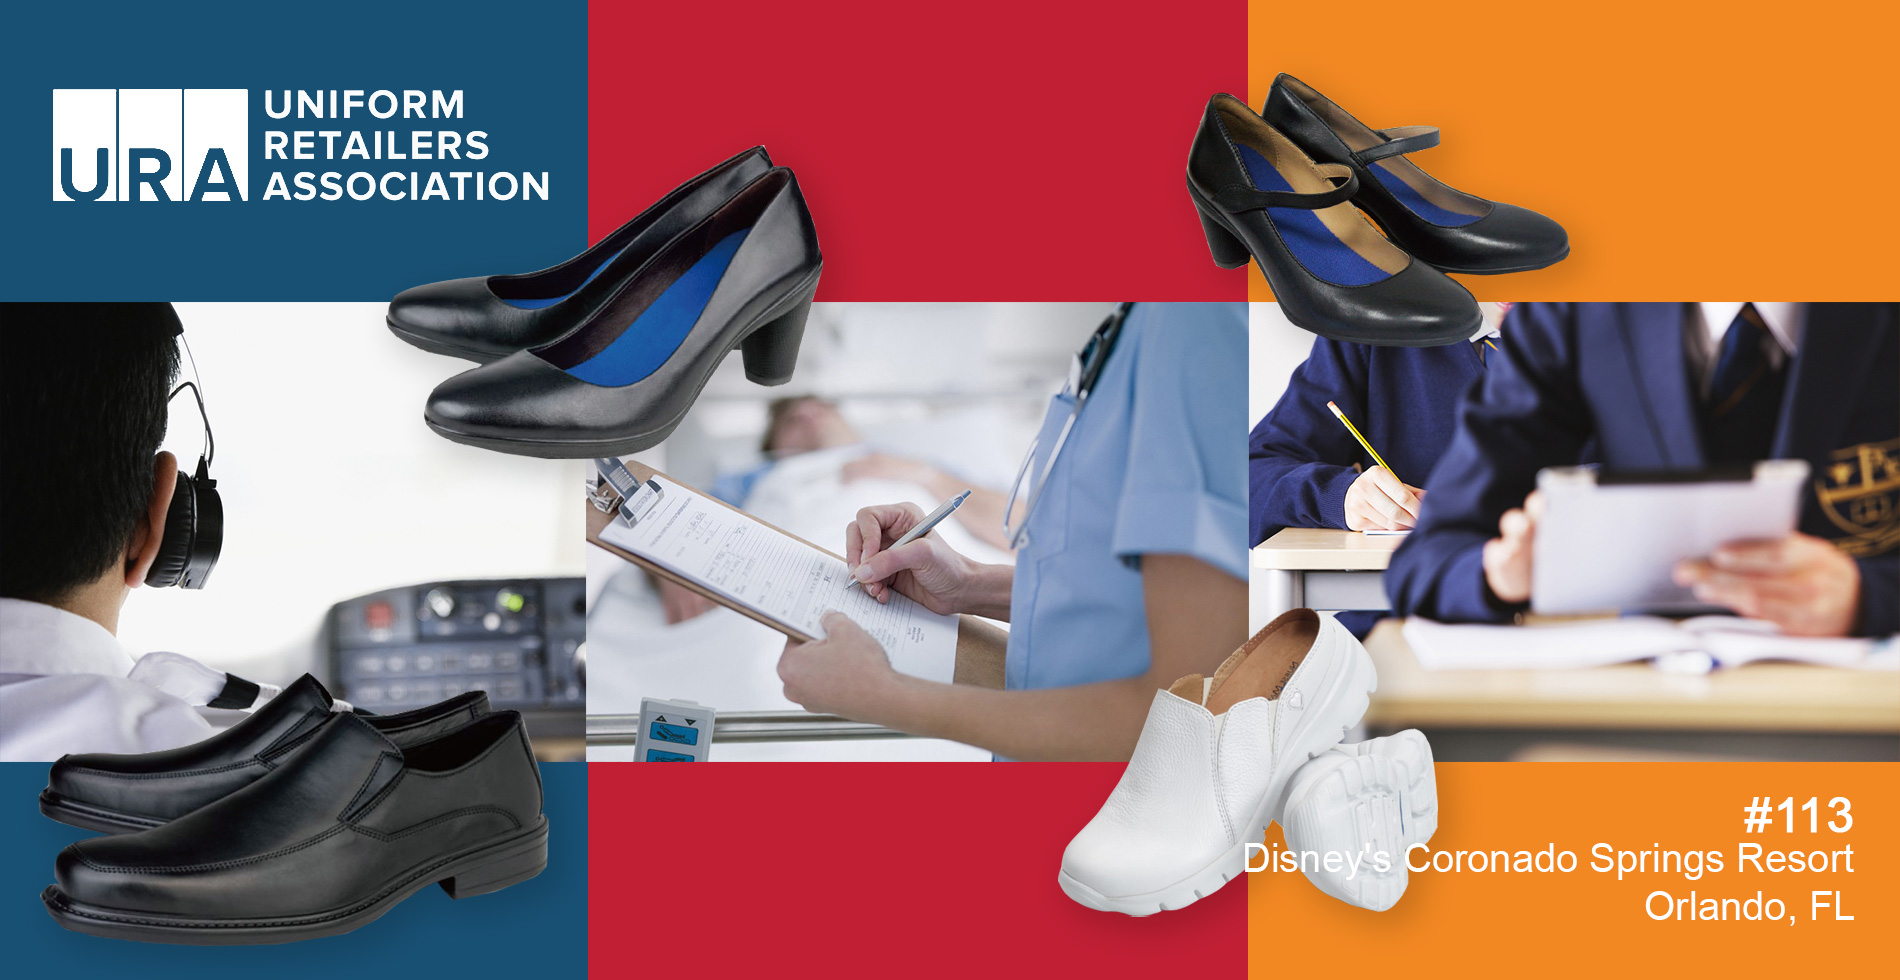 Work shoes product line introduced on URA tradeshow 2019